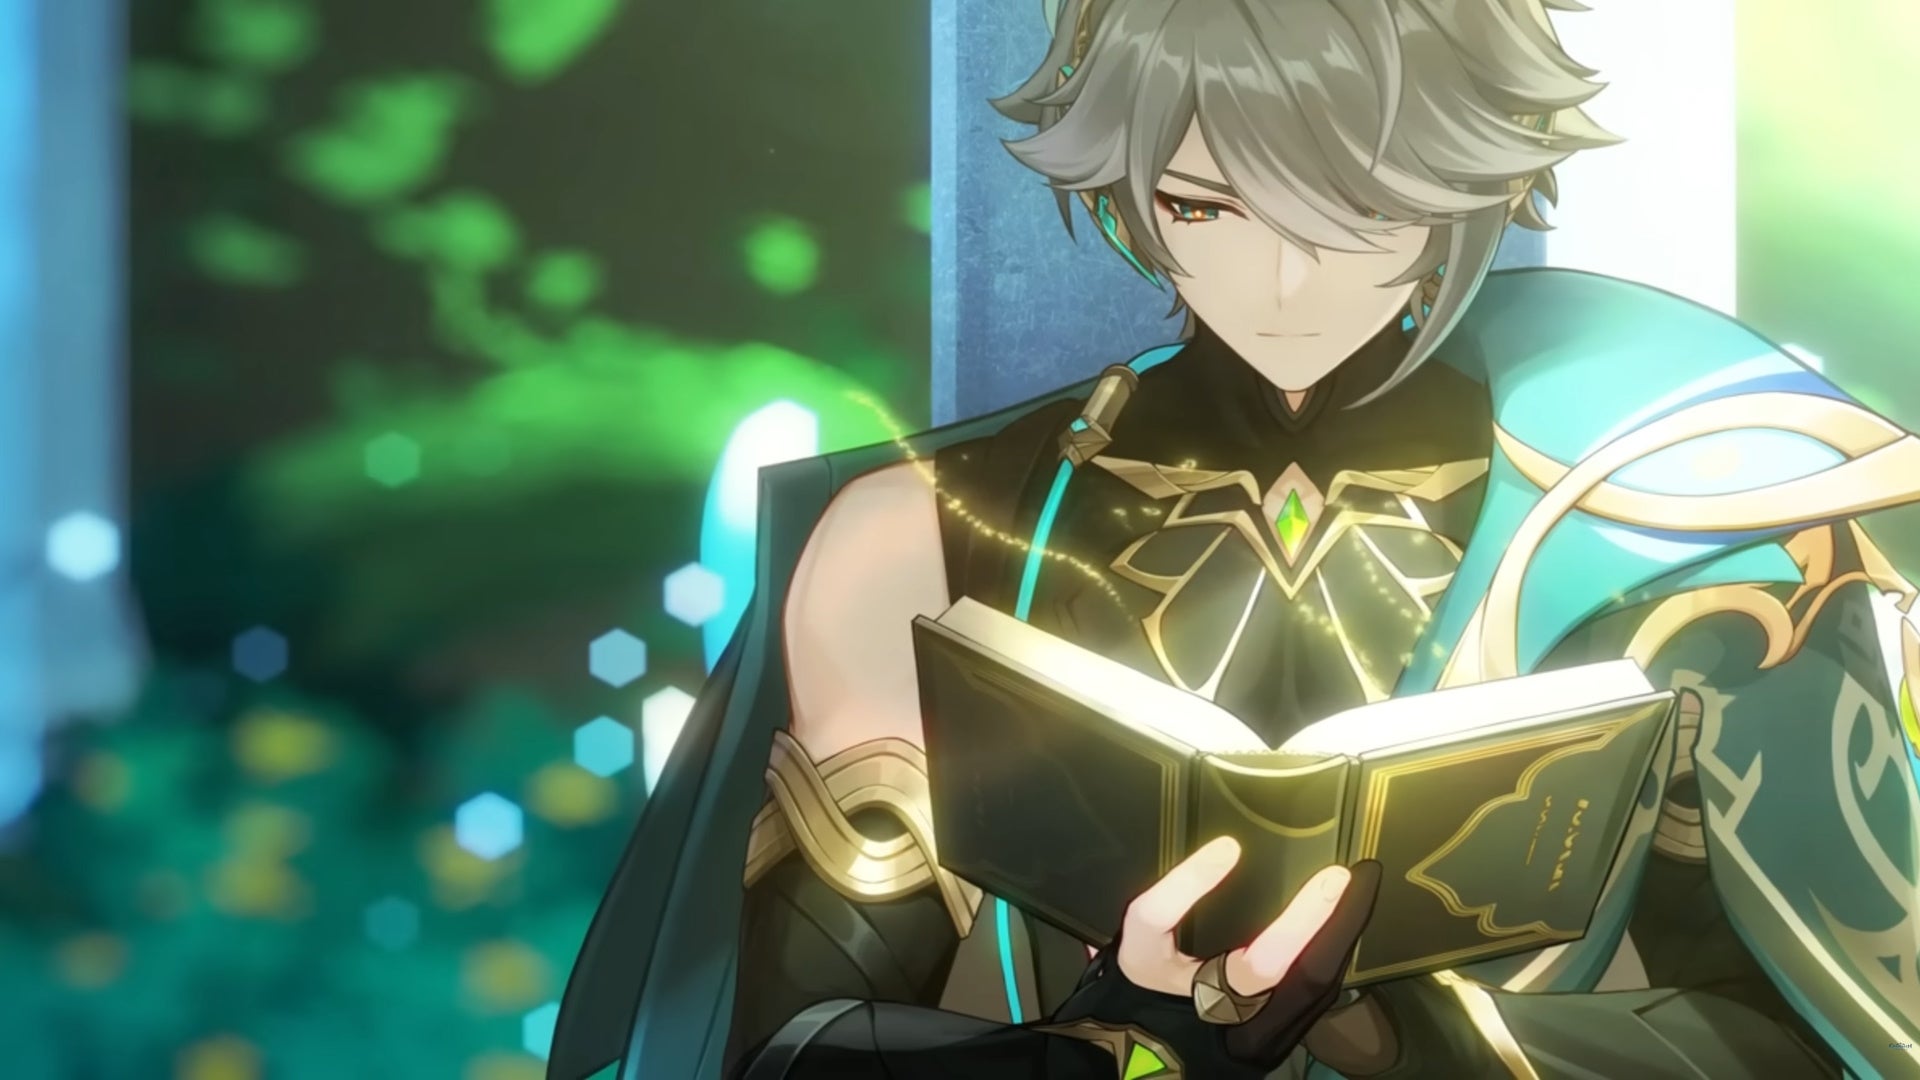 Genshin Impact Alhaitham build: An anime man with short silver hair, wearing a black tunic with a green cape, is holding a book and wearing a thoughtful expression. The book's pages glow faintly